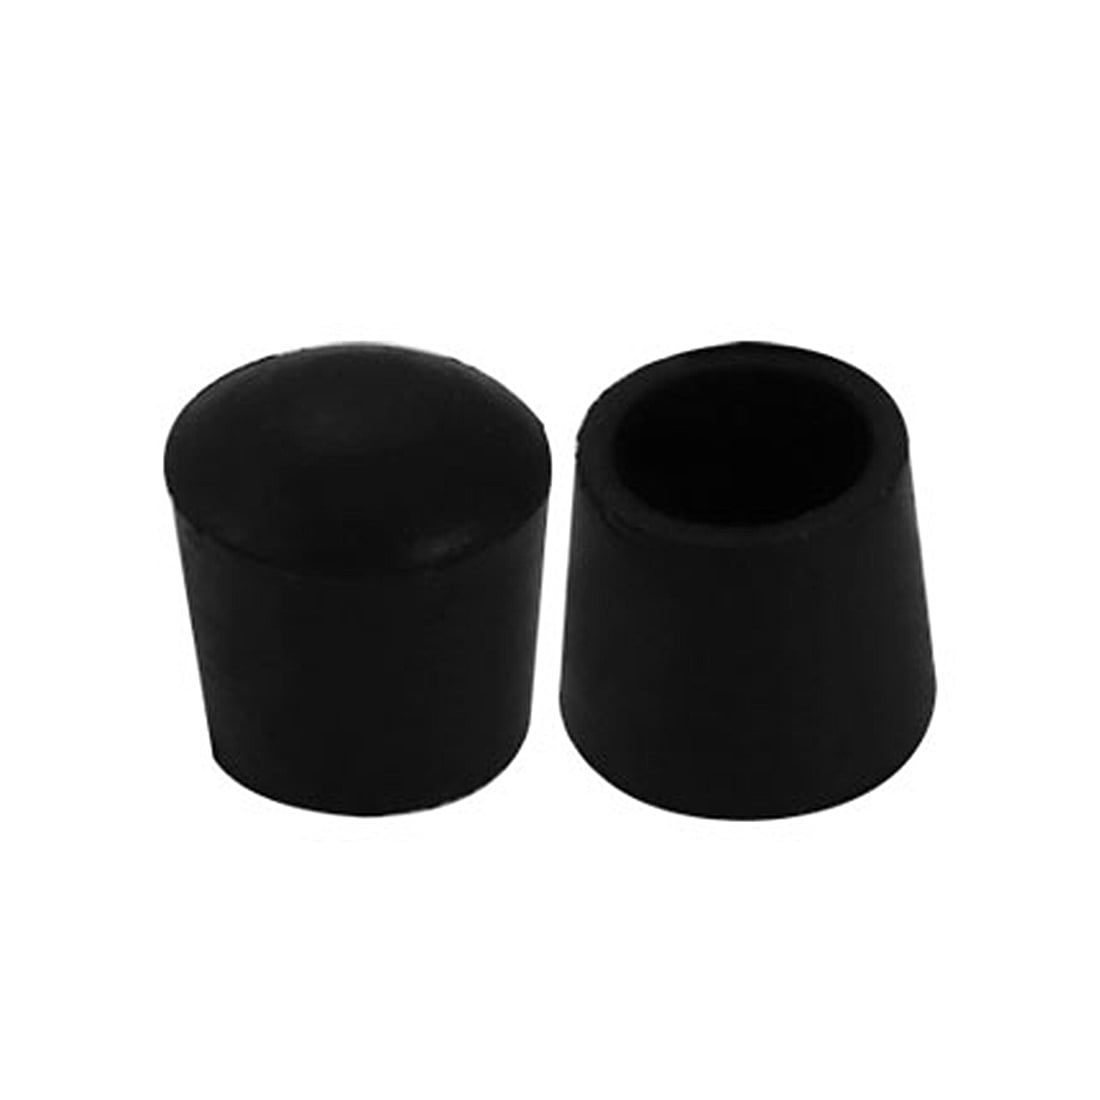 Rubber Furniture Caps 25mm Inner Diameter Round Table Chair Legs Covers 20Pcs 